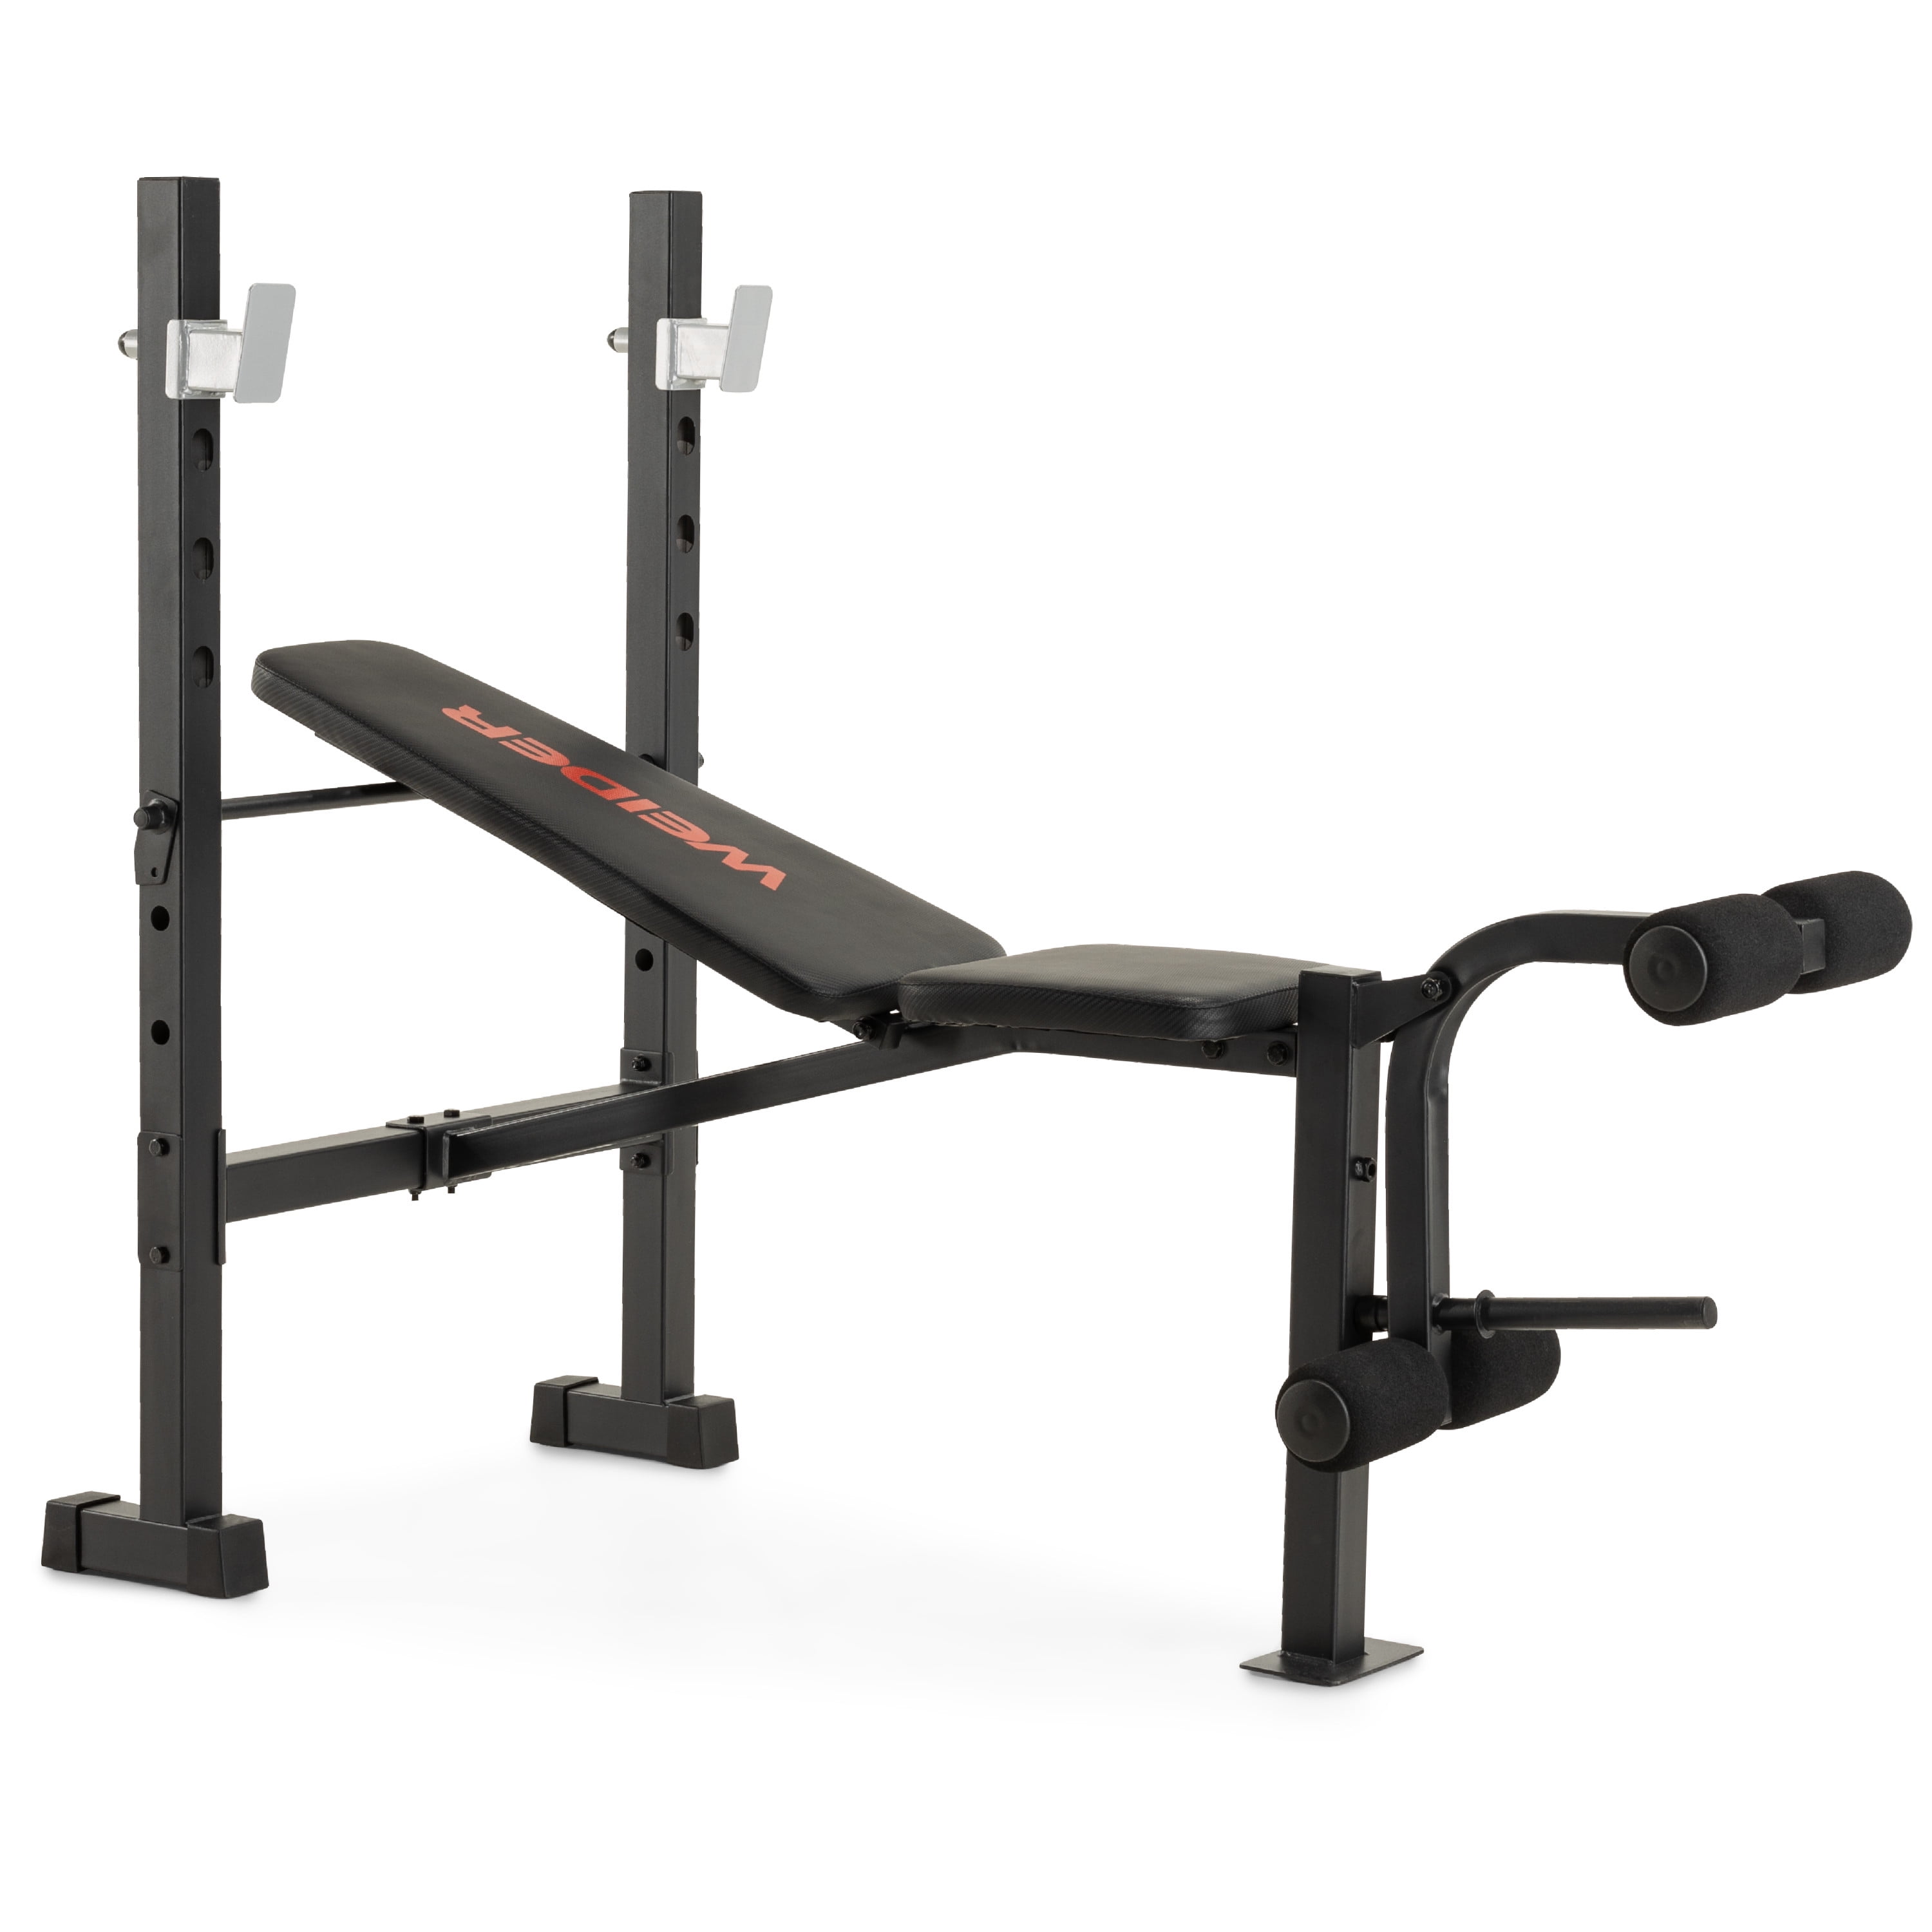 Weider WEBE39317 Strength Flat Weight Bench with Sewn Vinyl Seats for sale online 